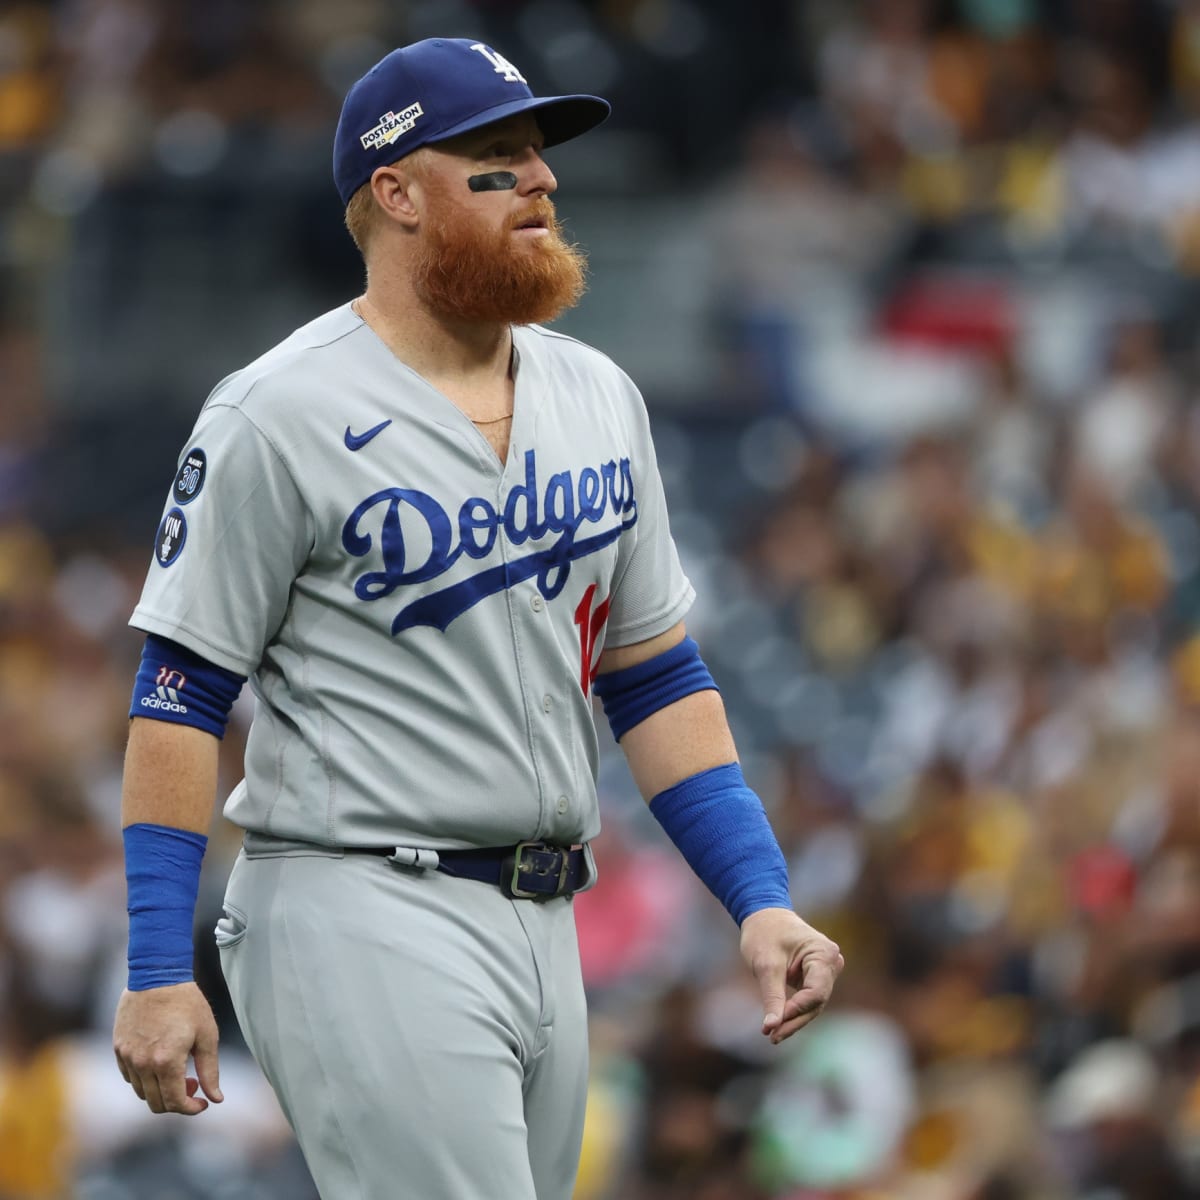 Dodgers News: Justin Turner Remains Hopeful He'll Be in Blue Next